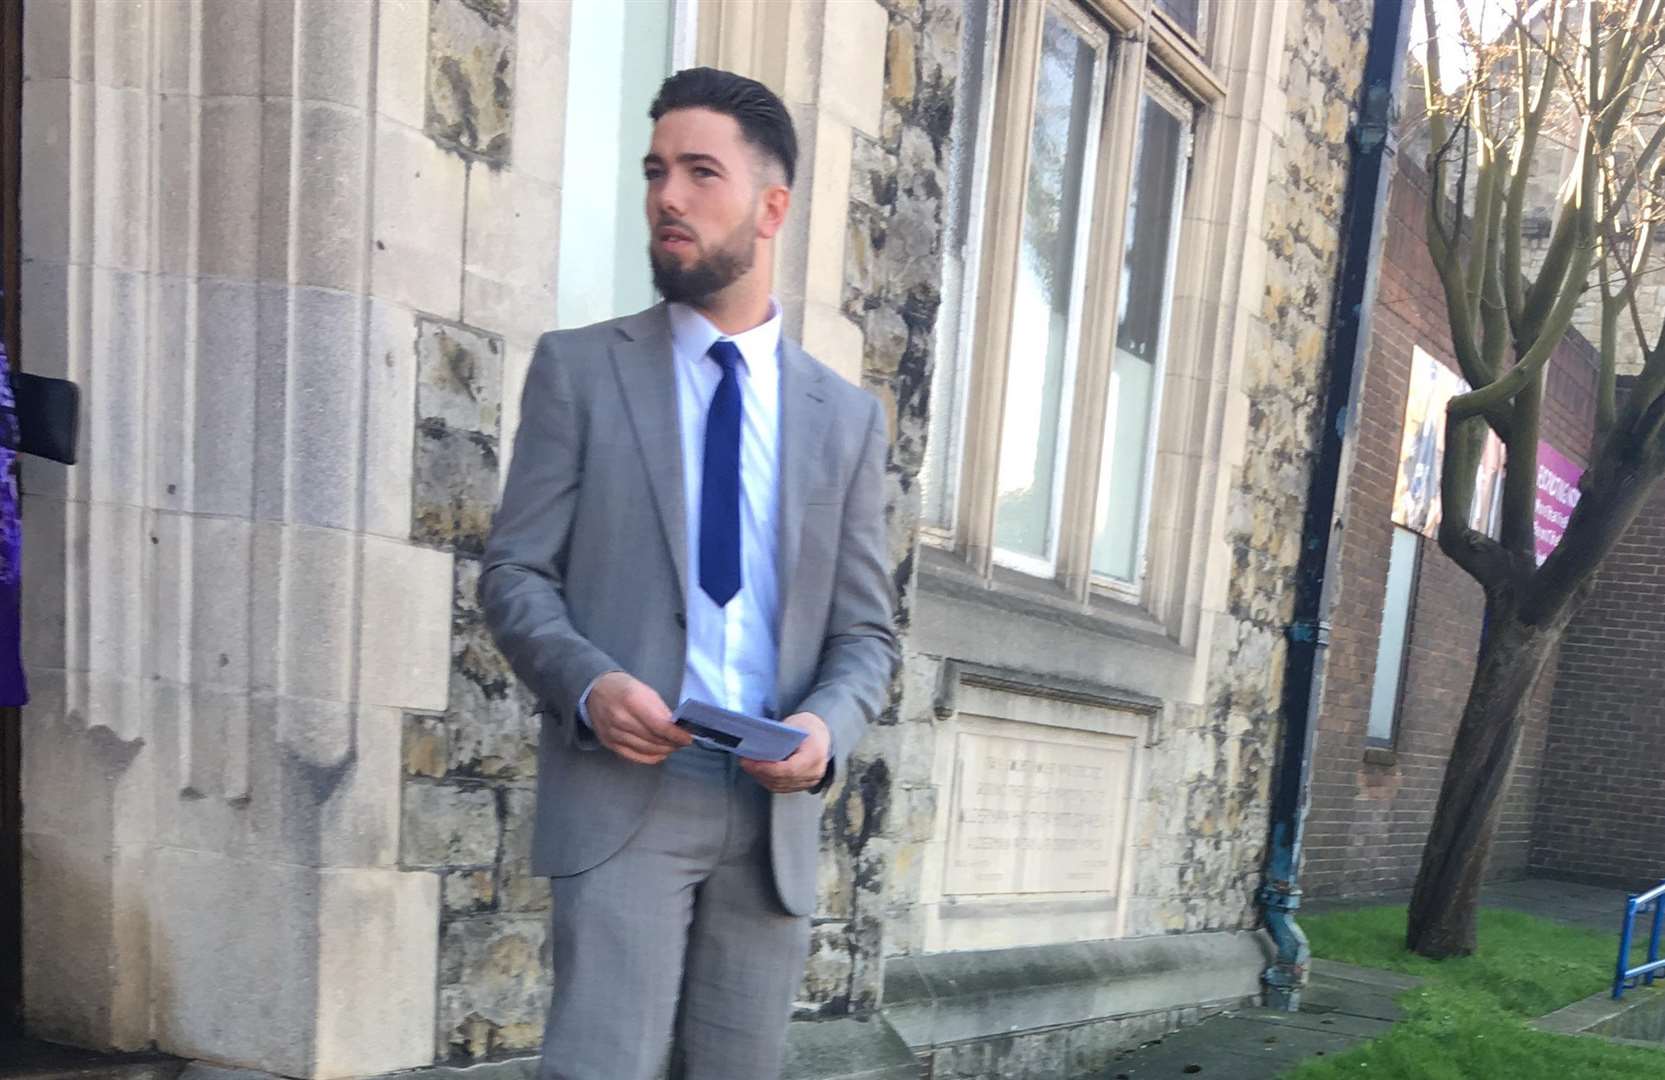 Thomas Parnell slapped a police officer outside Bar Chocolate in Maidstone (7210674)